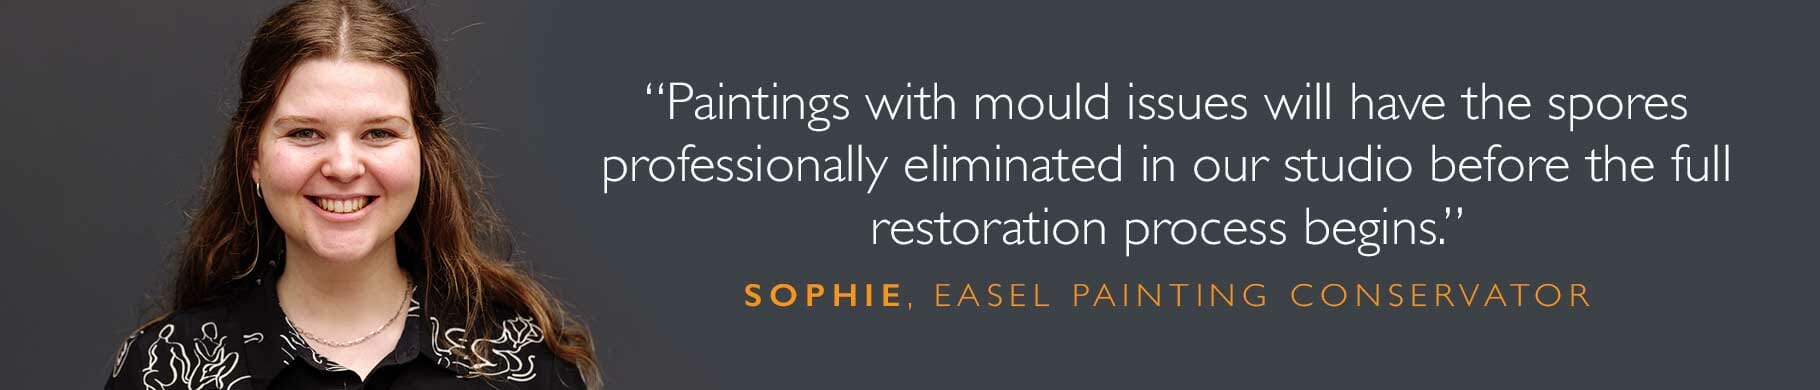 sophie quote about removing mould from paintings